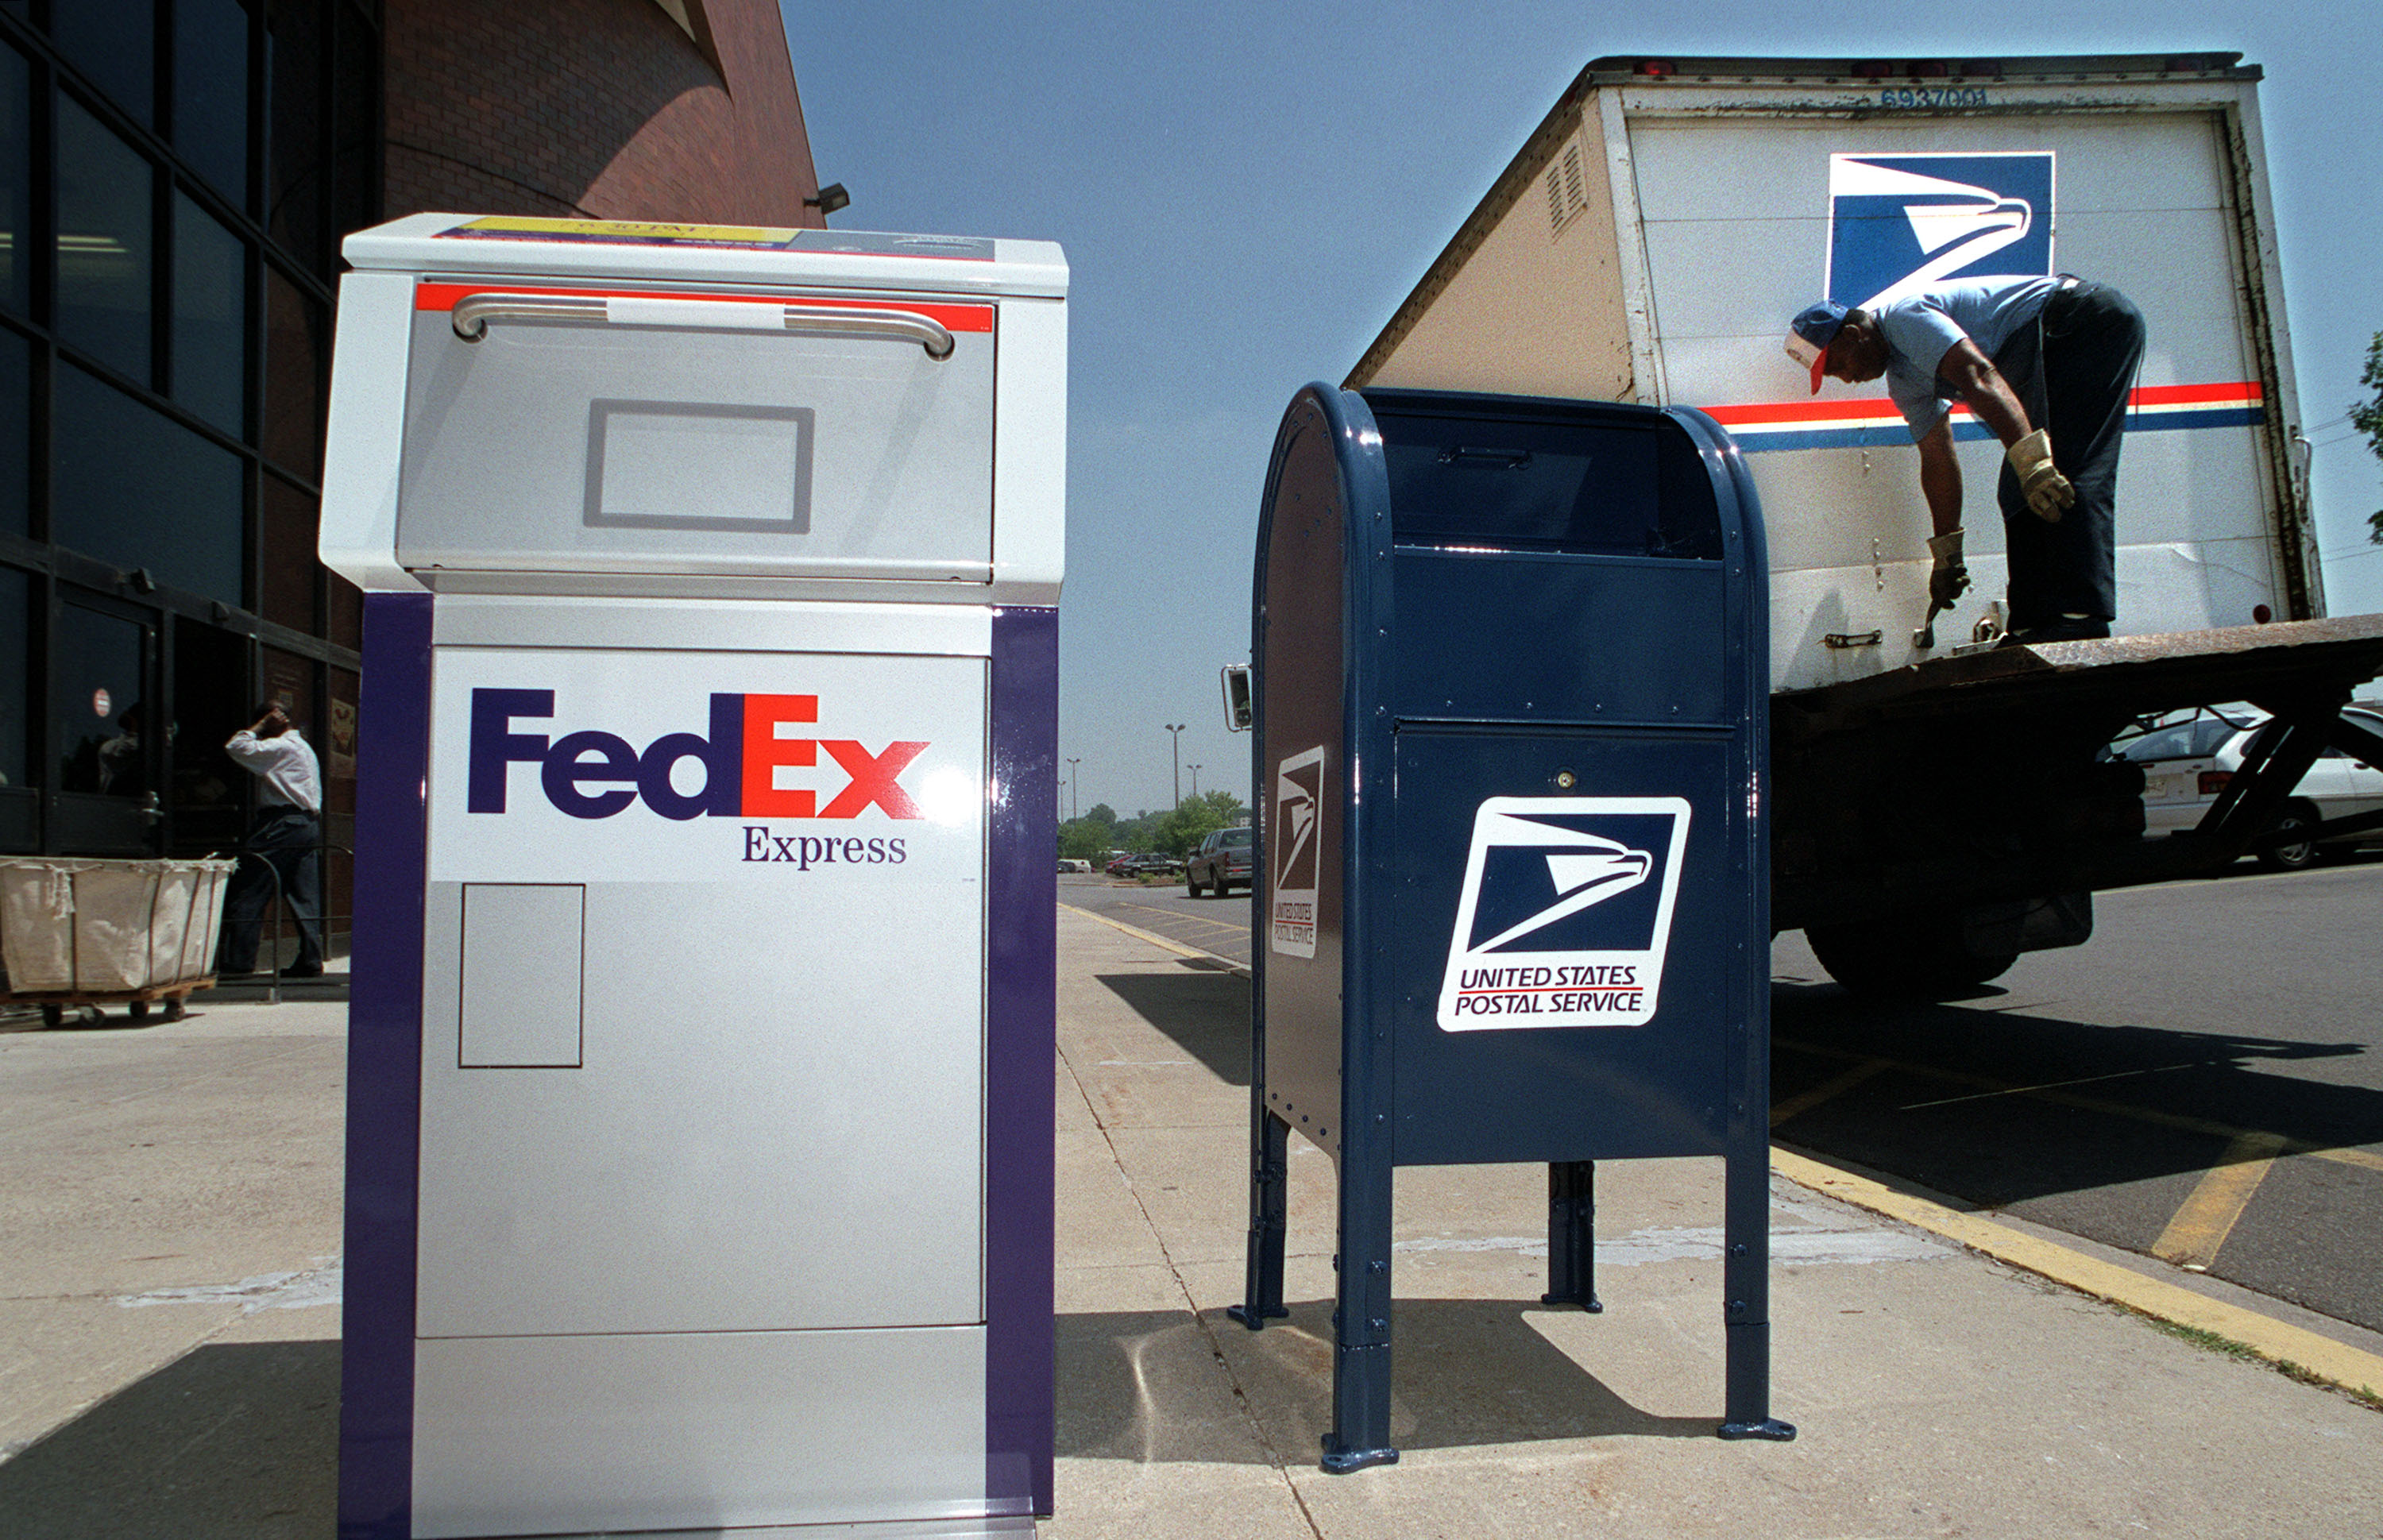 Man Shows Difference Between Fedex And Usps In Shocking Doorbell Footage